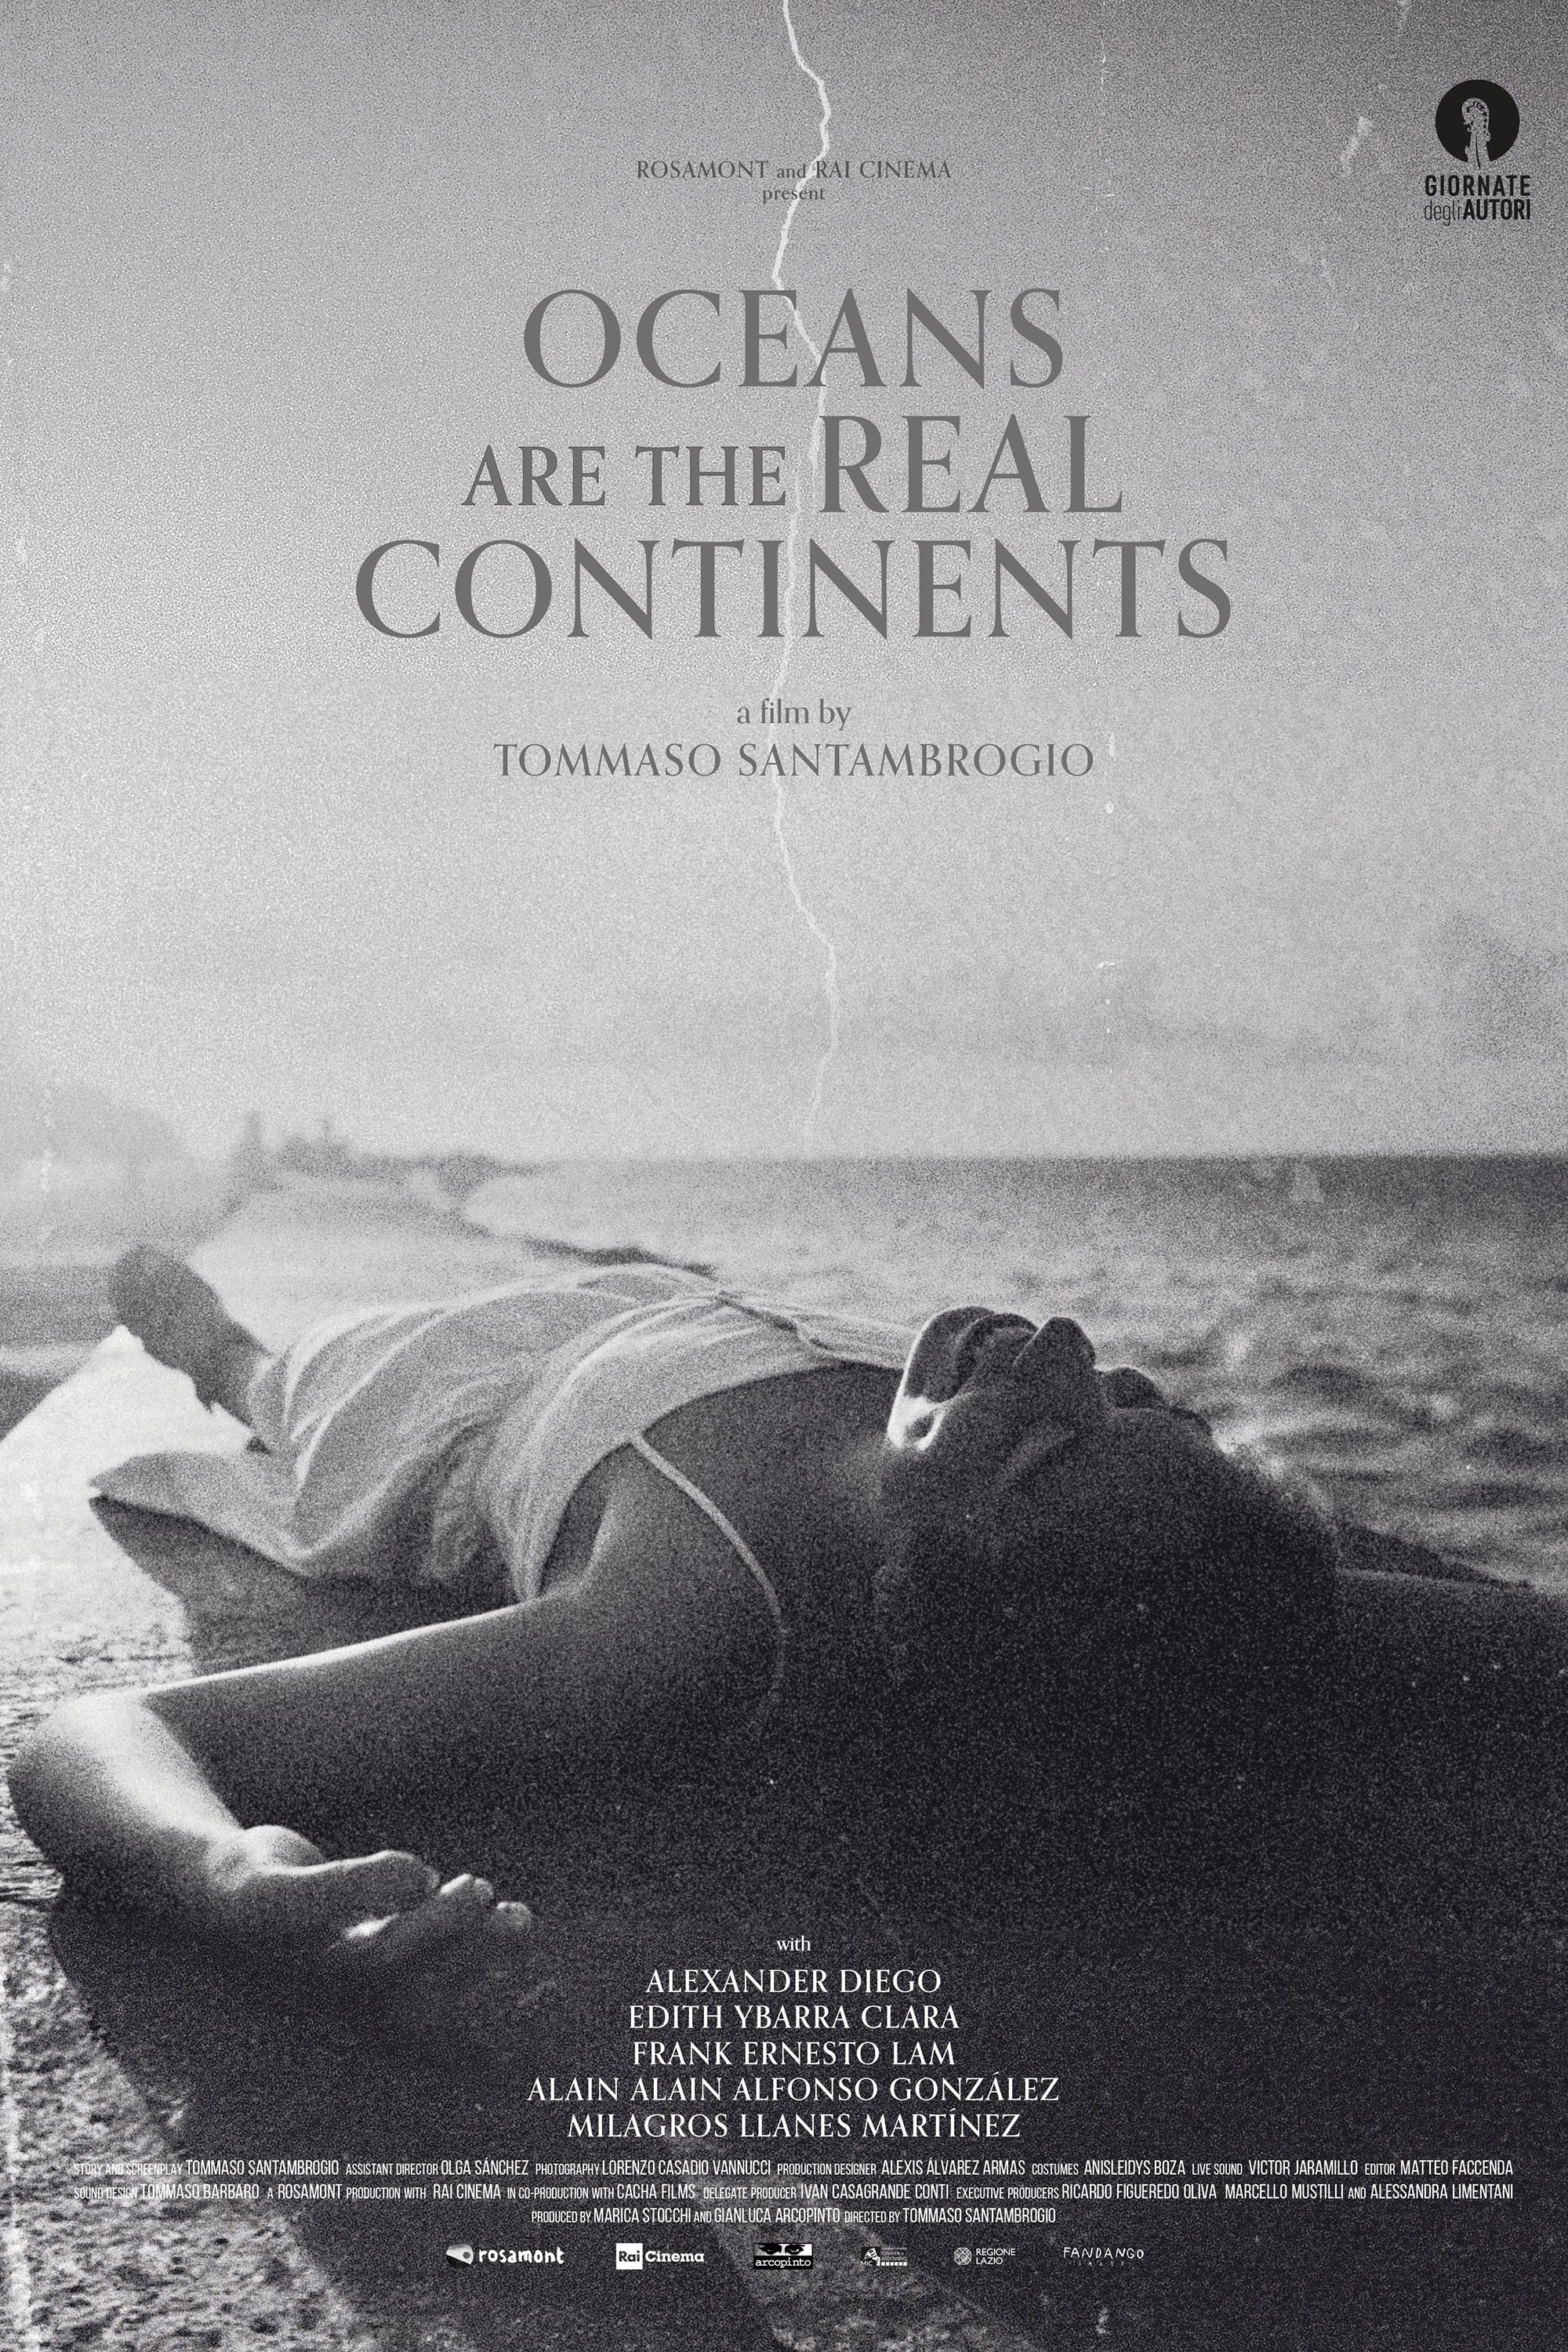 Oceans Are the Real Continents